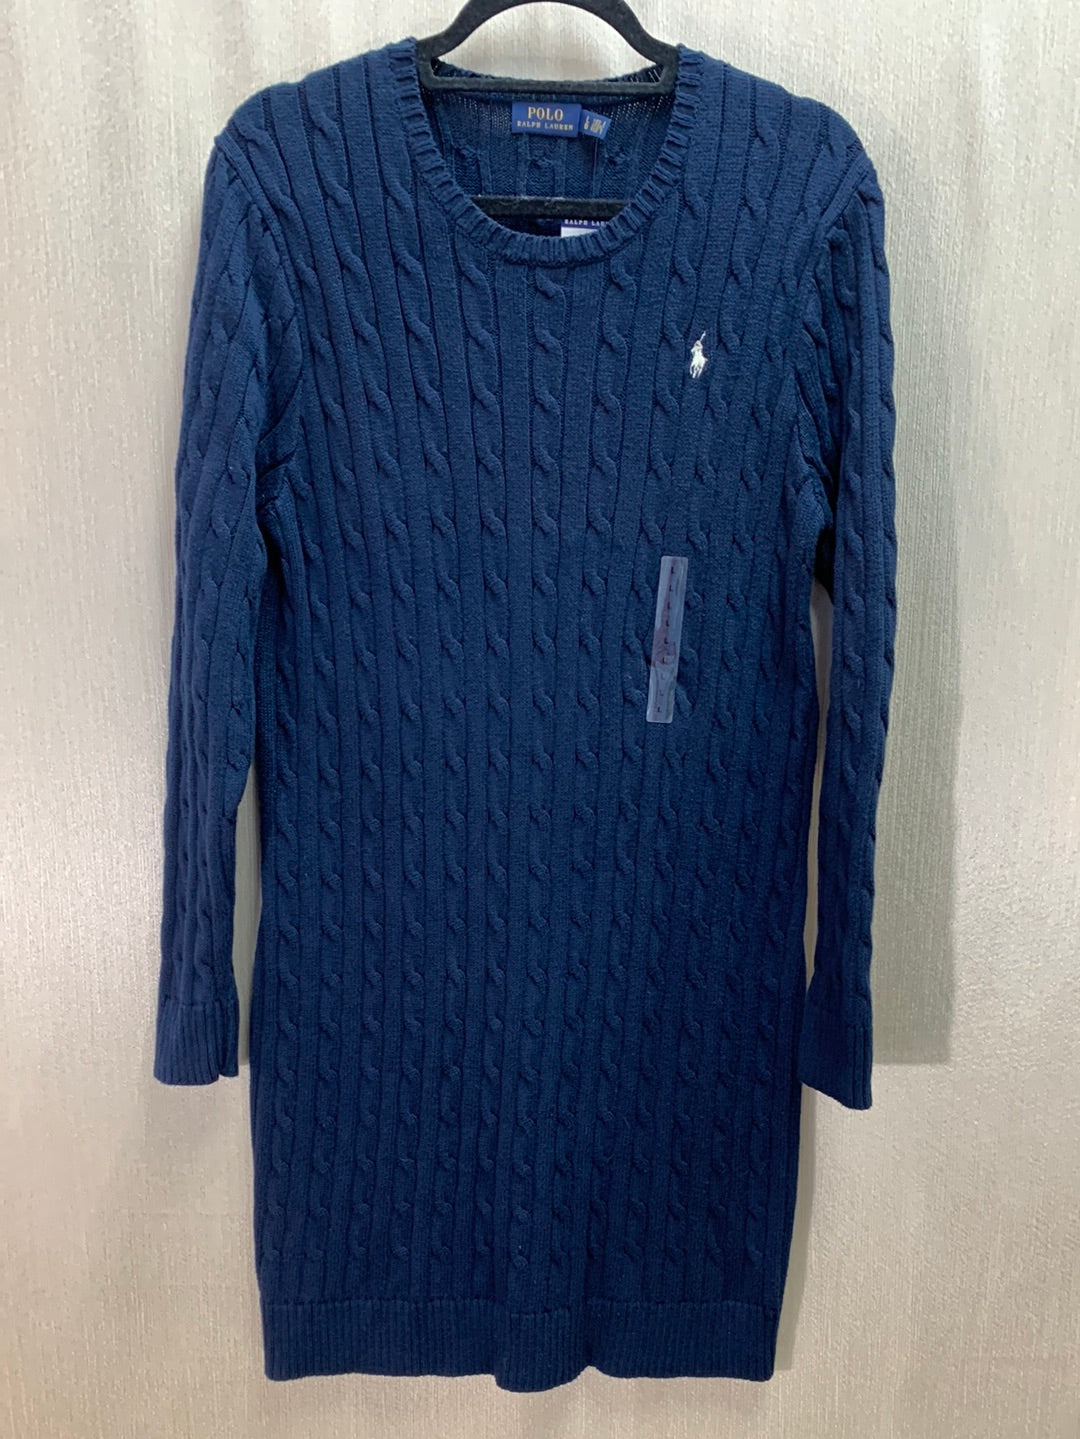 NWT - POLO RALPH LAUREN navy blue Cable Knit LS Sweater Dress - L